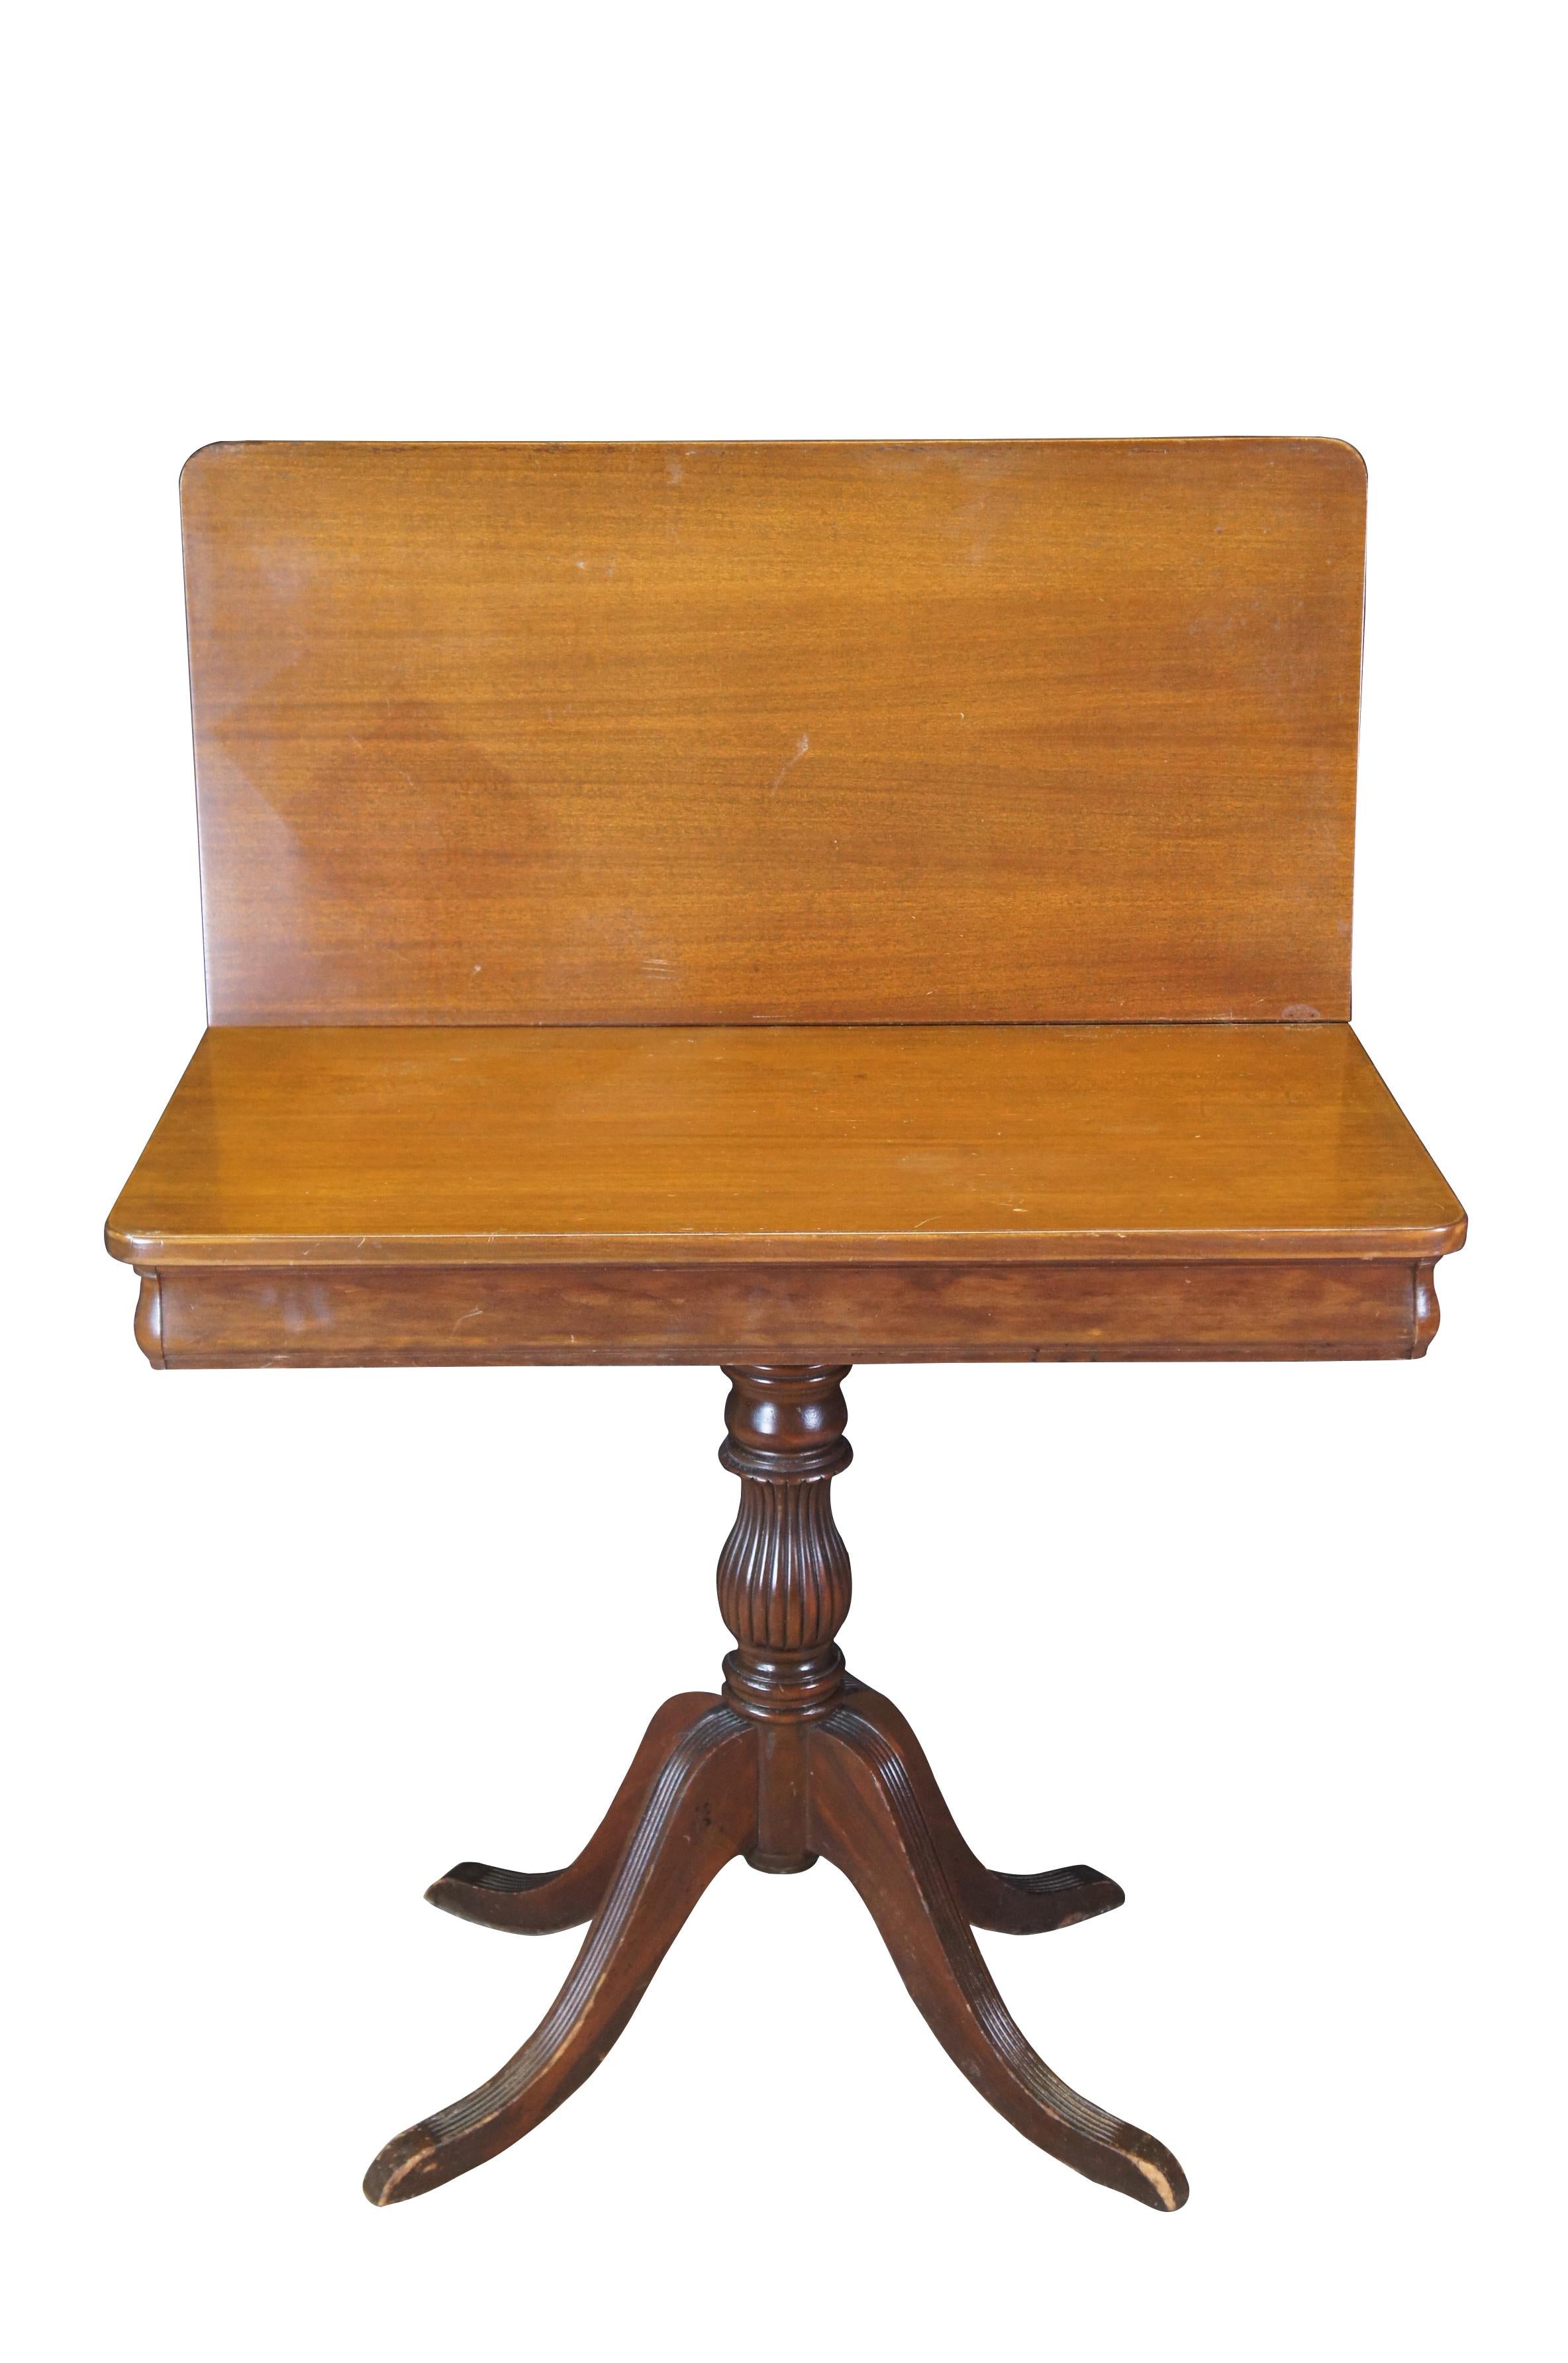 Antique flip top game table.  Made of mahogany featuring Duncan Phyfe styling with fluted legs and post that support the top, which opens to reveal a storage compartment.

Dimensions:
17